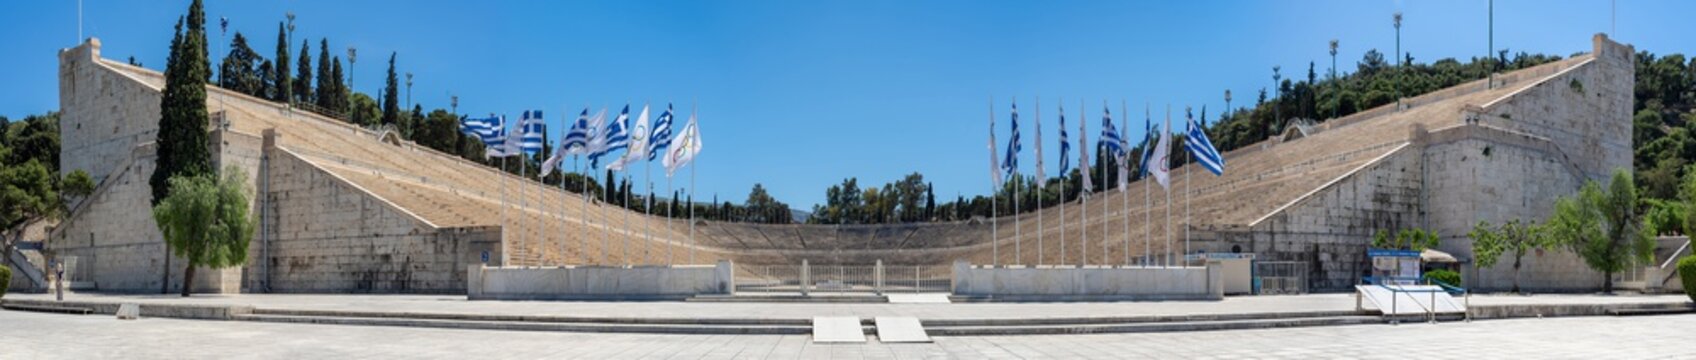 Athens, Attica, Greece. The Panathenaic Stadium or Kallimarmaro at the center of Athens city. It hosted the opening and closing ceremonies of the first modern Olympics in 1896. Sunny day